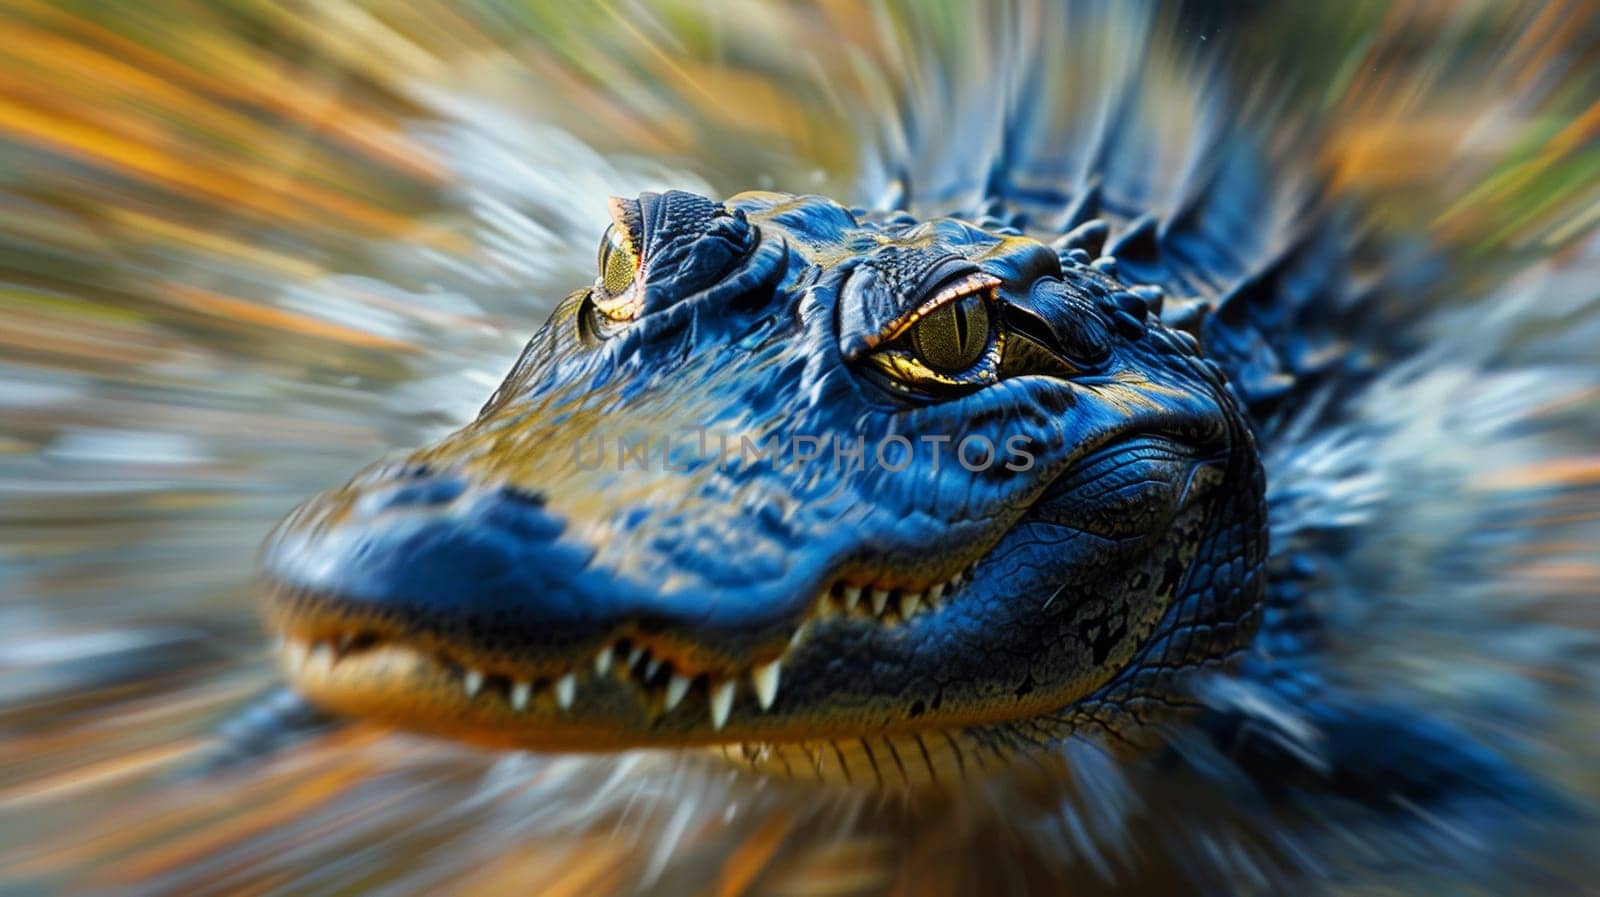 A close up of a blue alligator with its mouth open